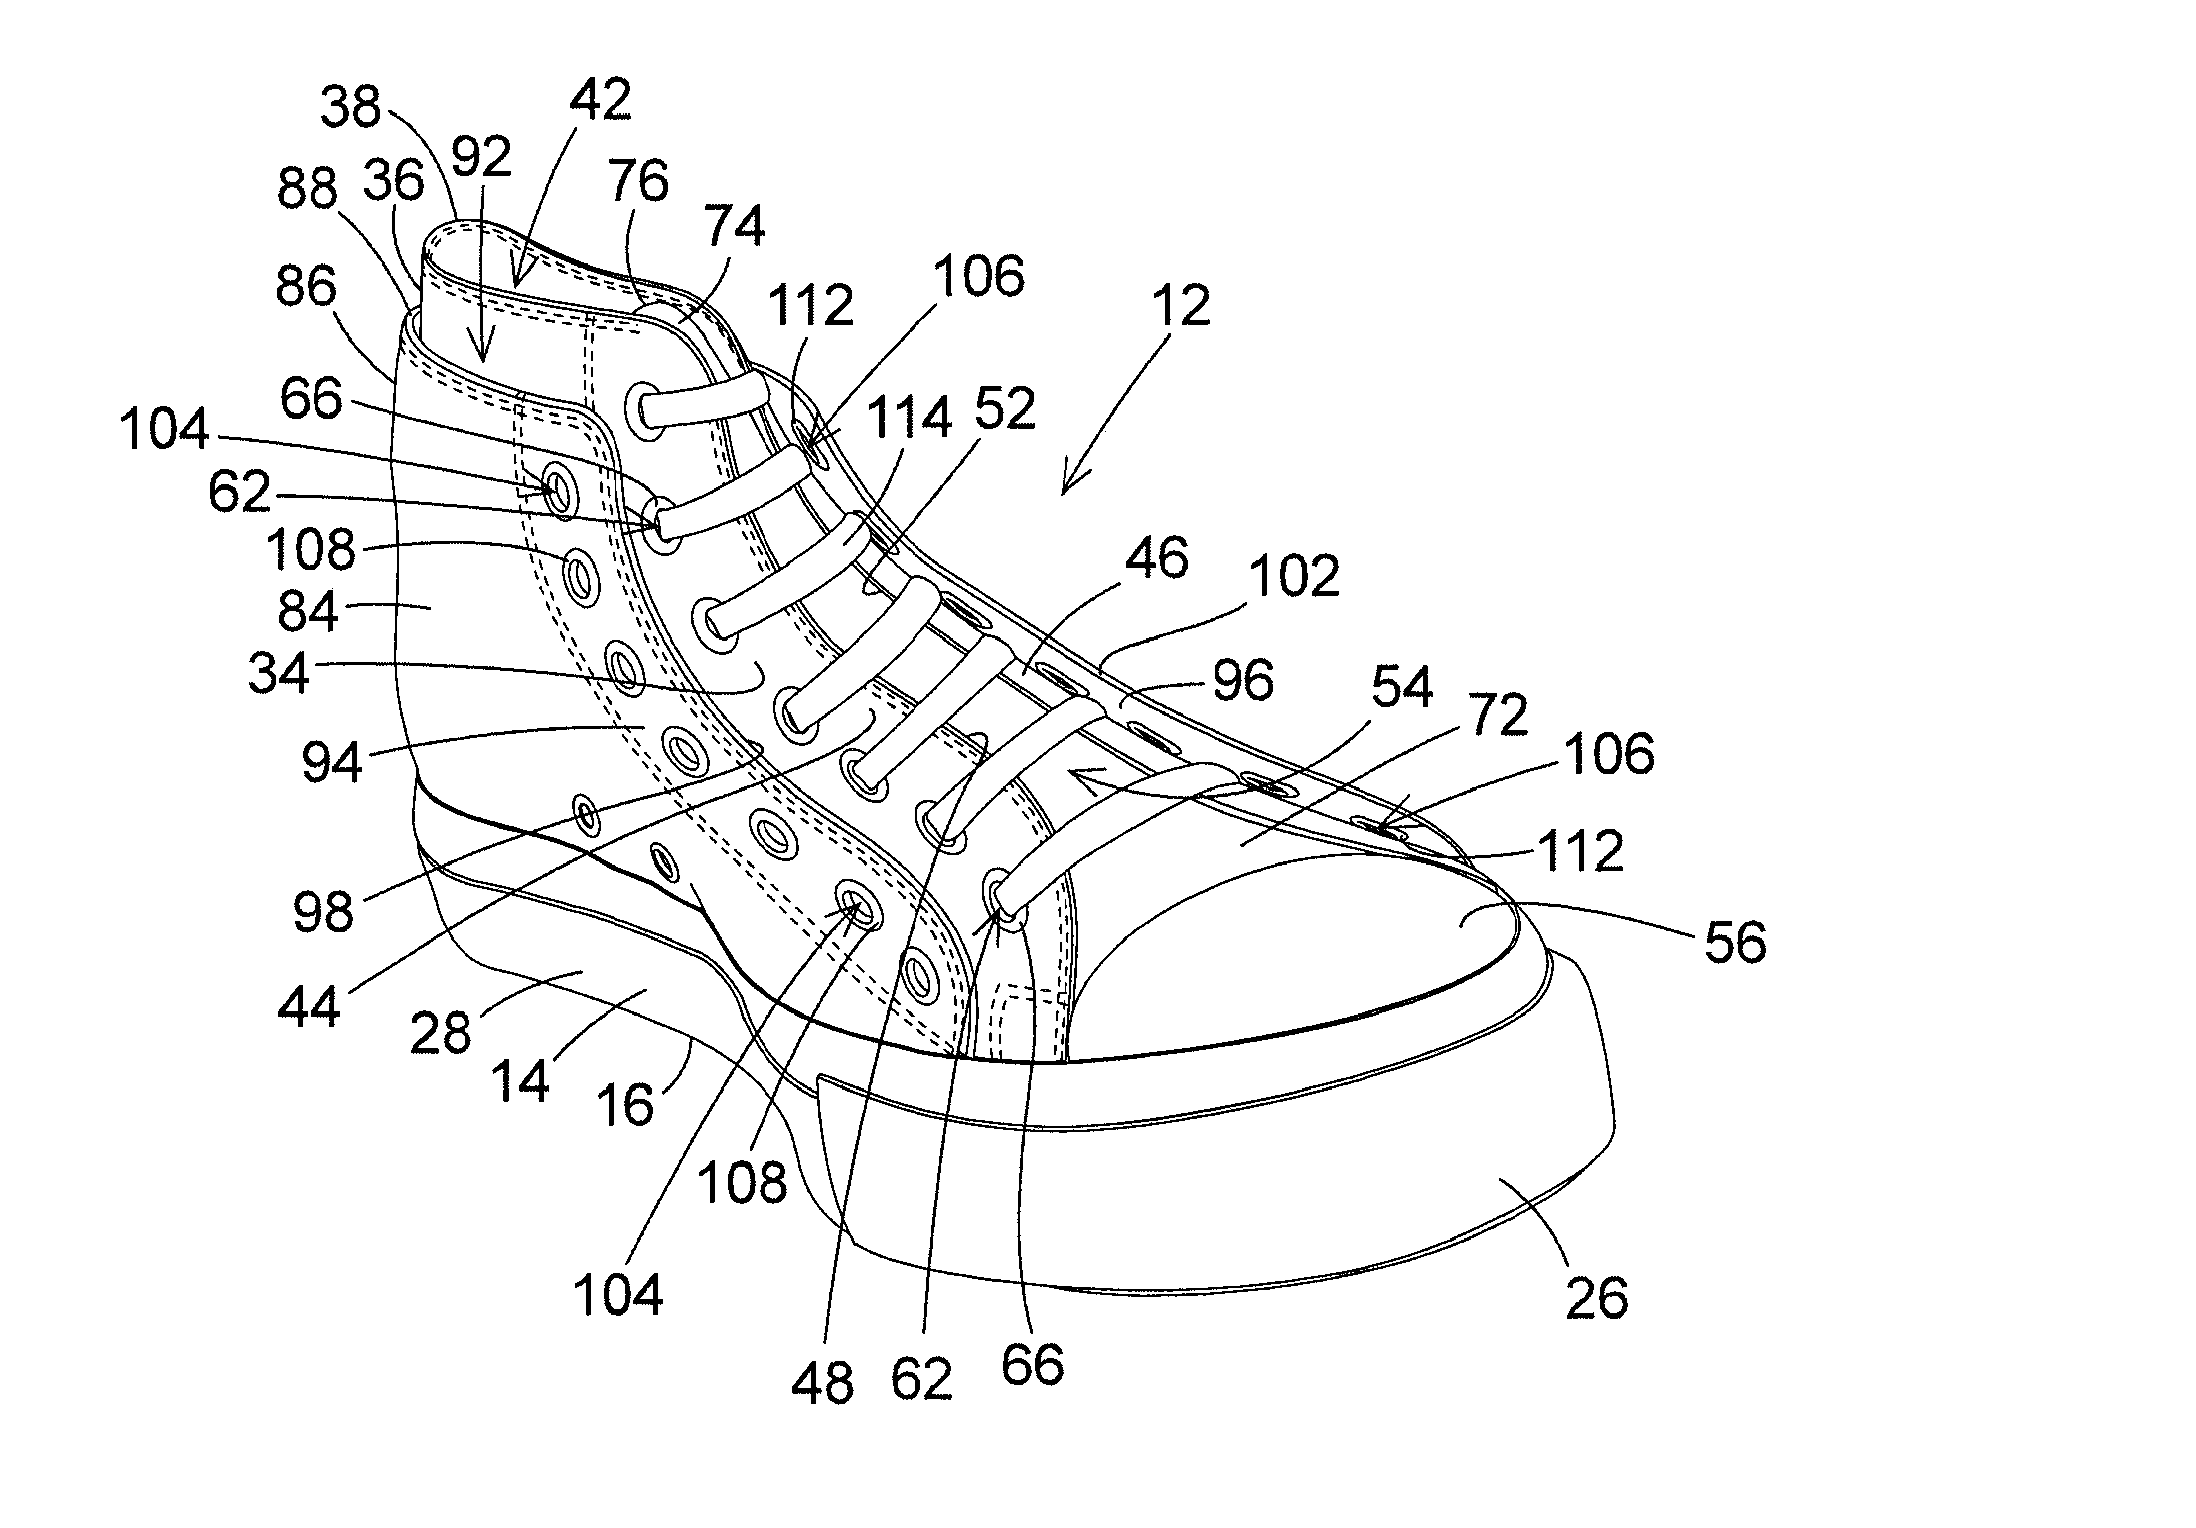 Shoe construction with double upper